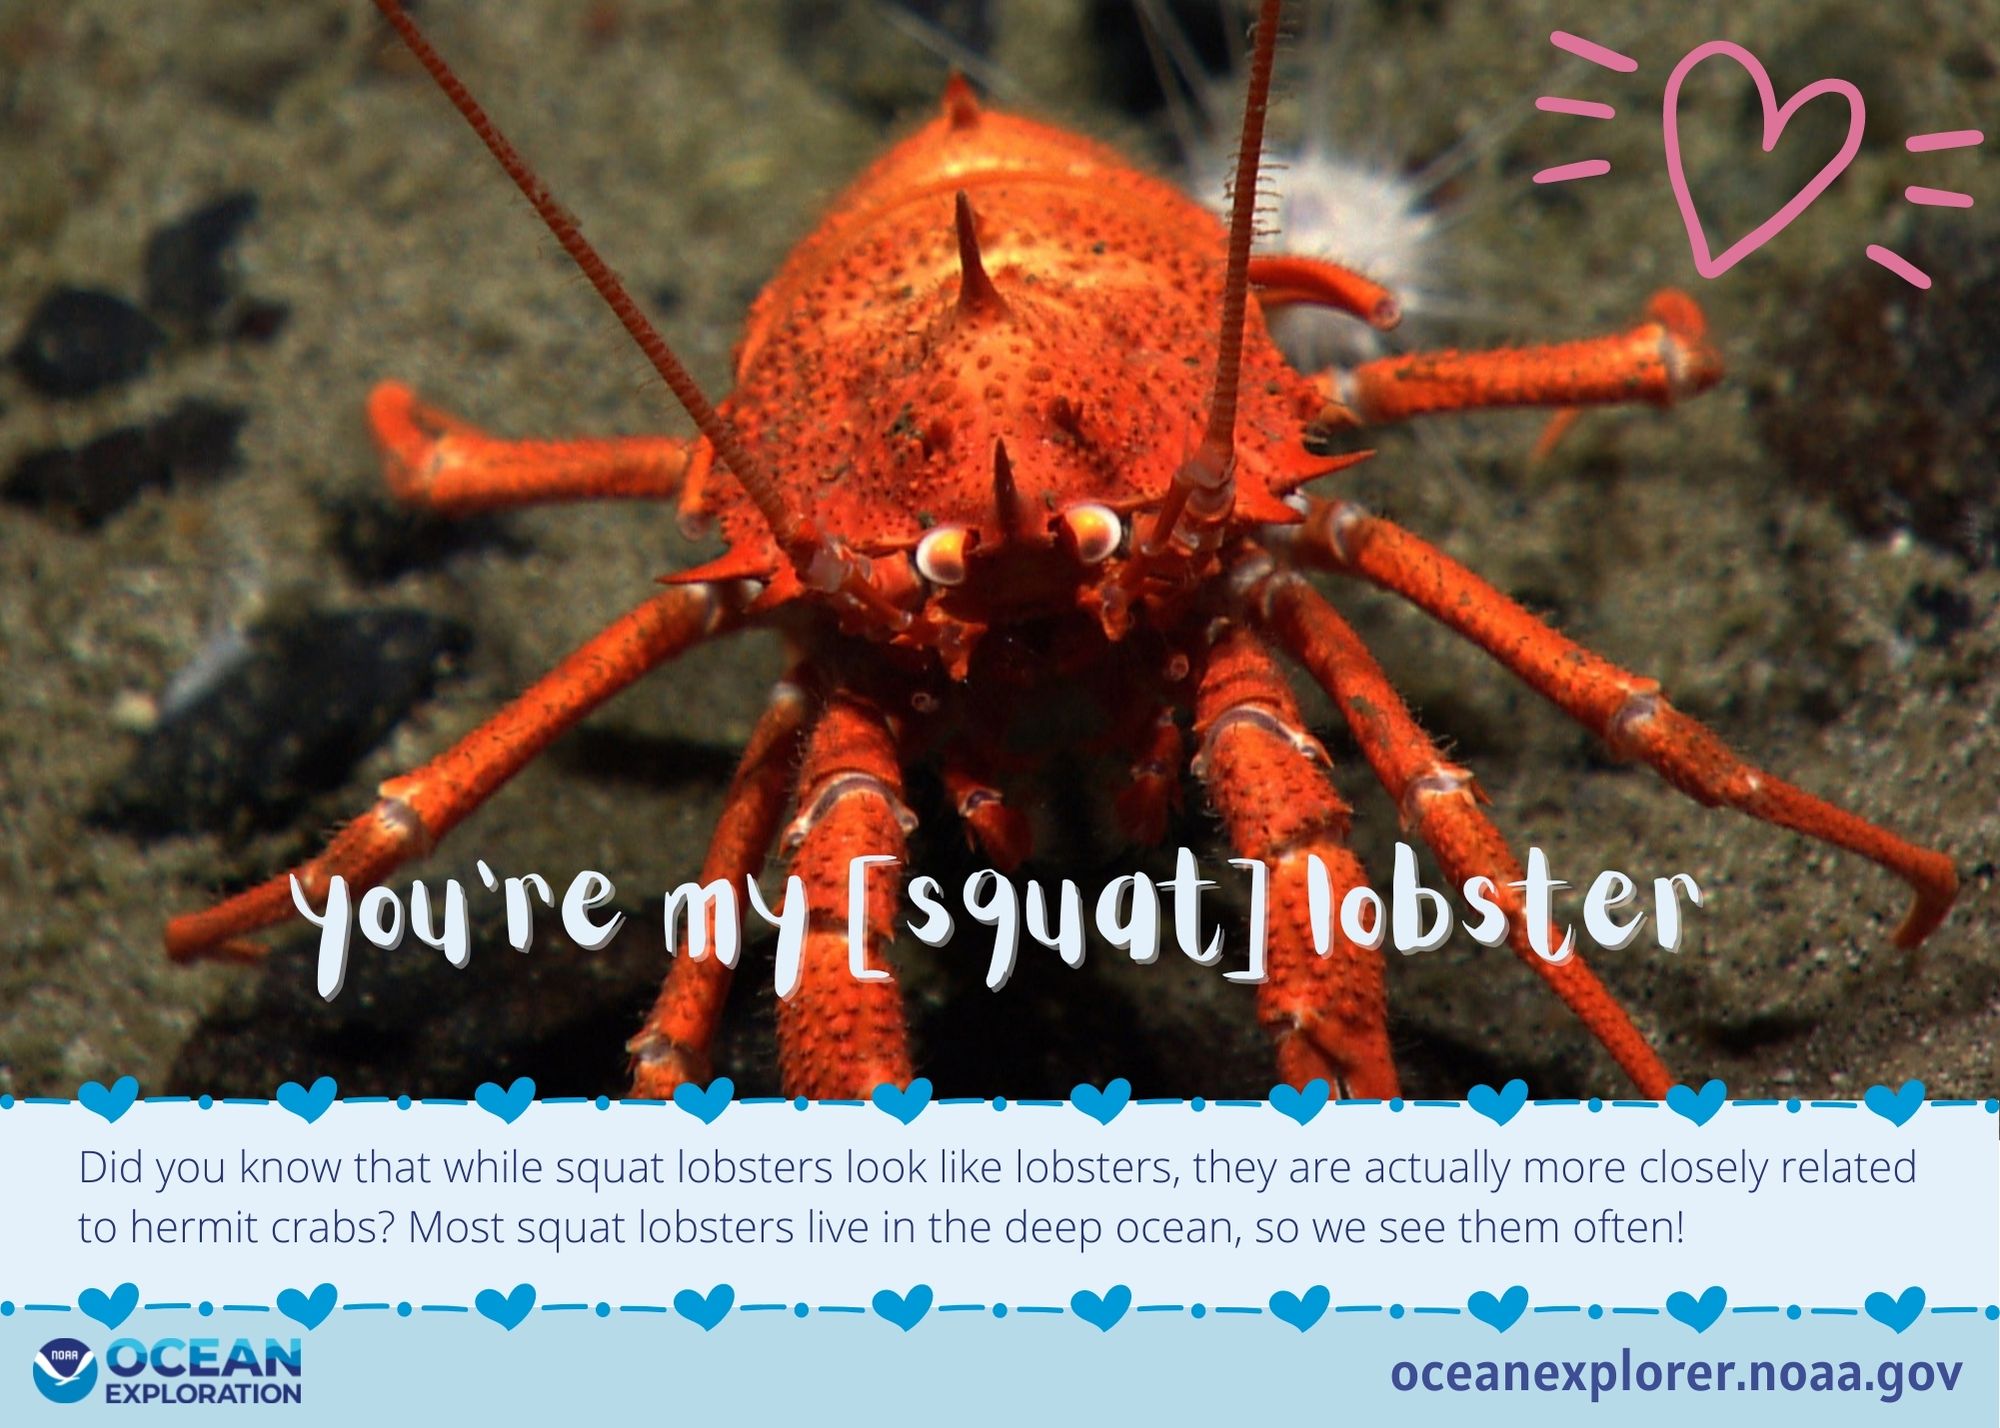 You're my squat lobster